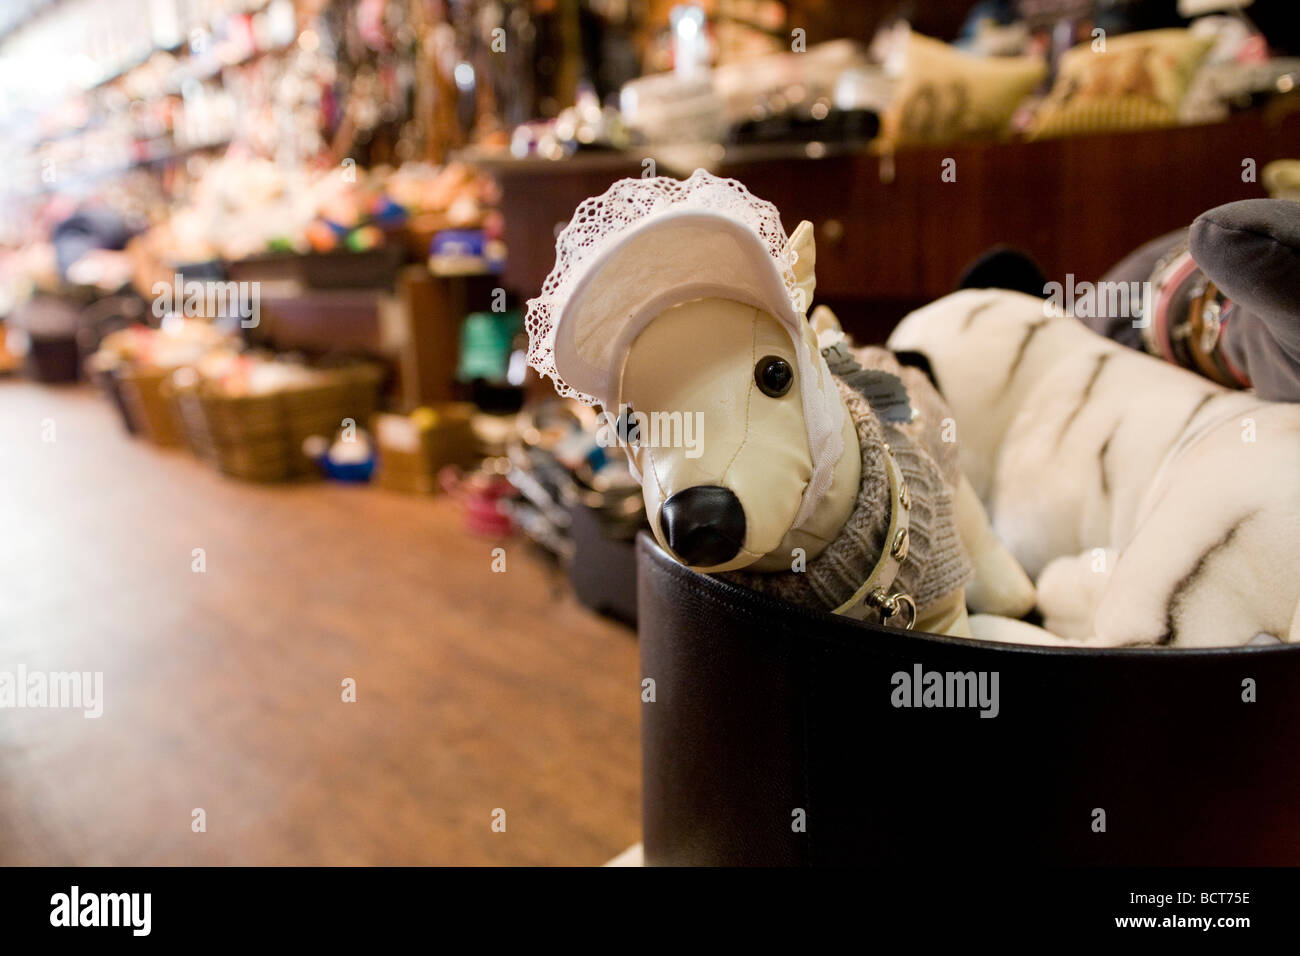 A toy dog on sale at the La Boutique du Chien, Cannes, France, 27 May 2009 Stock Photo